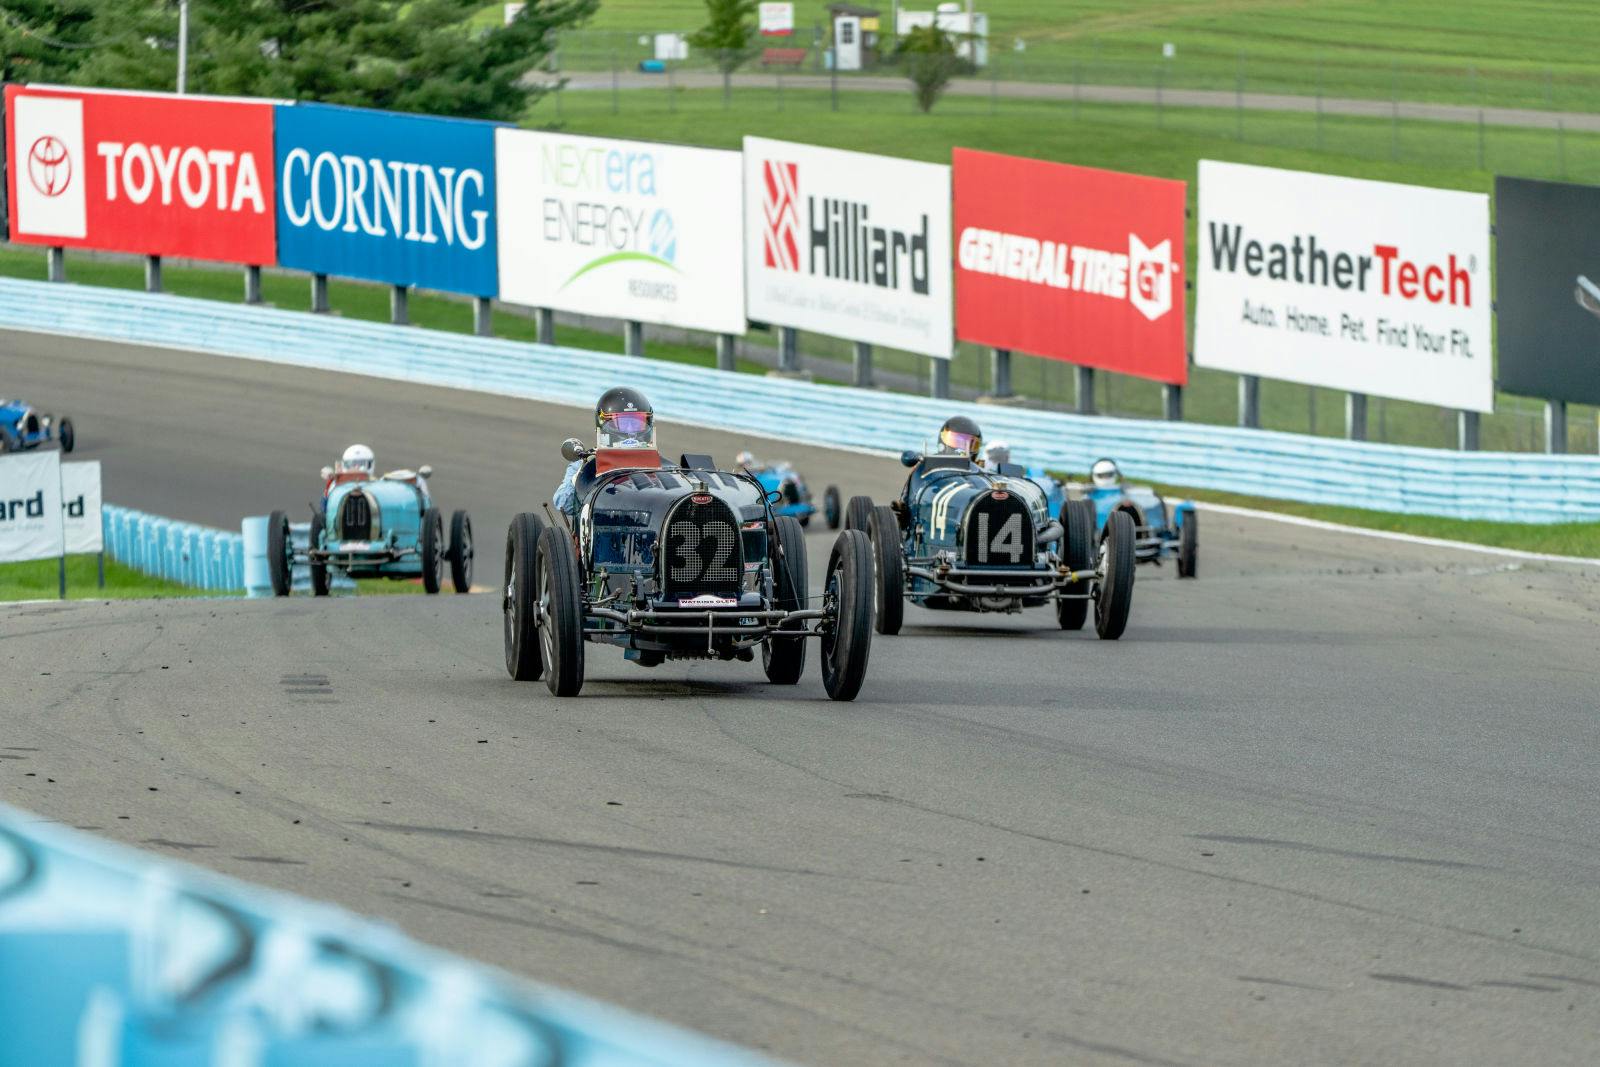 The historic Bugatti models delivered a sensational spectacle as they charged nose-to-tail around the modern Watkins Glen racing circuit.